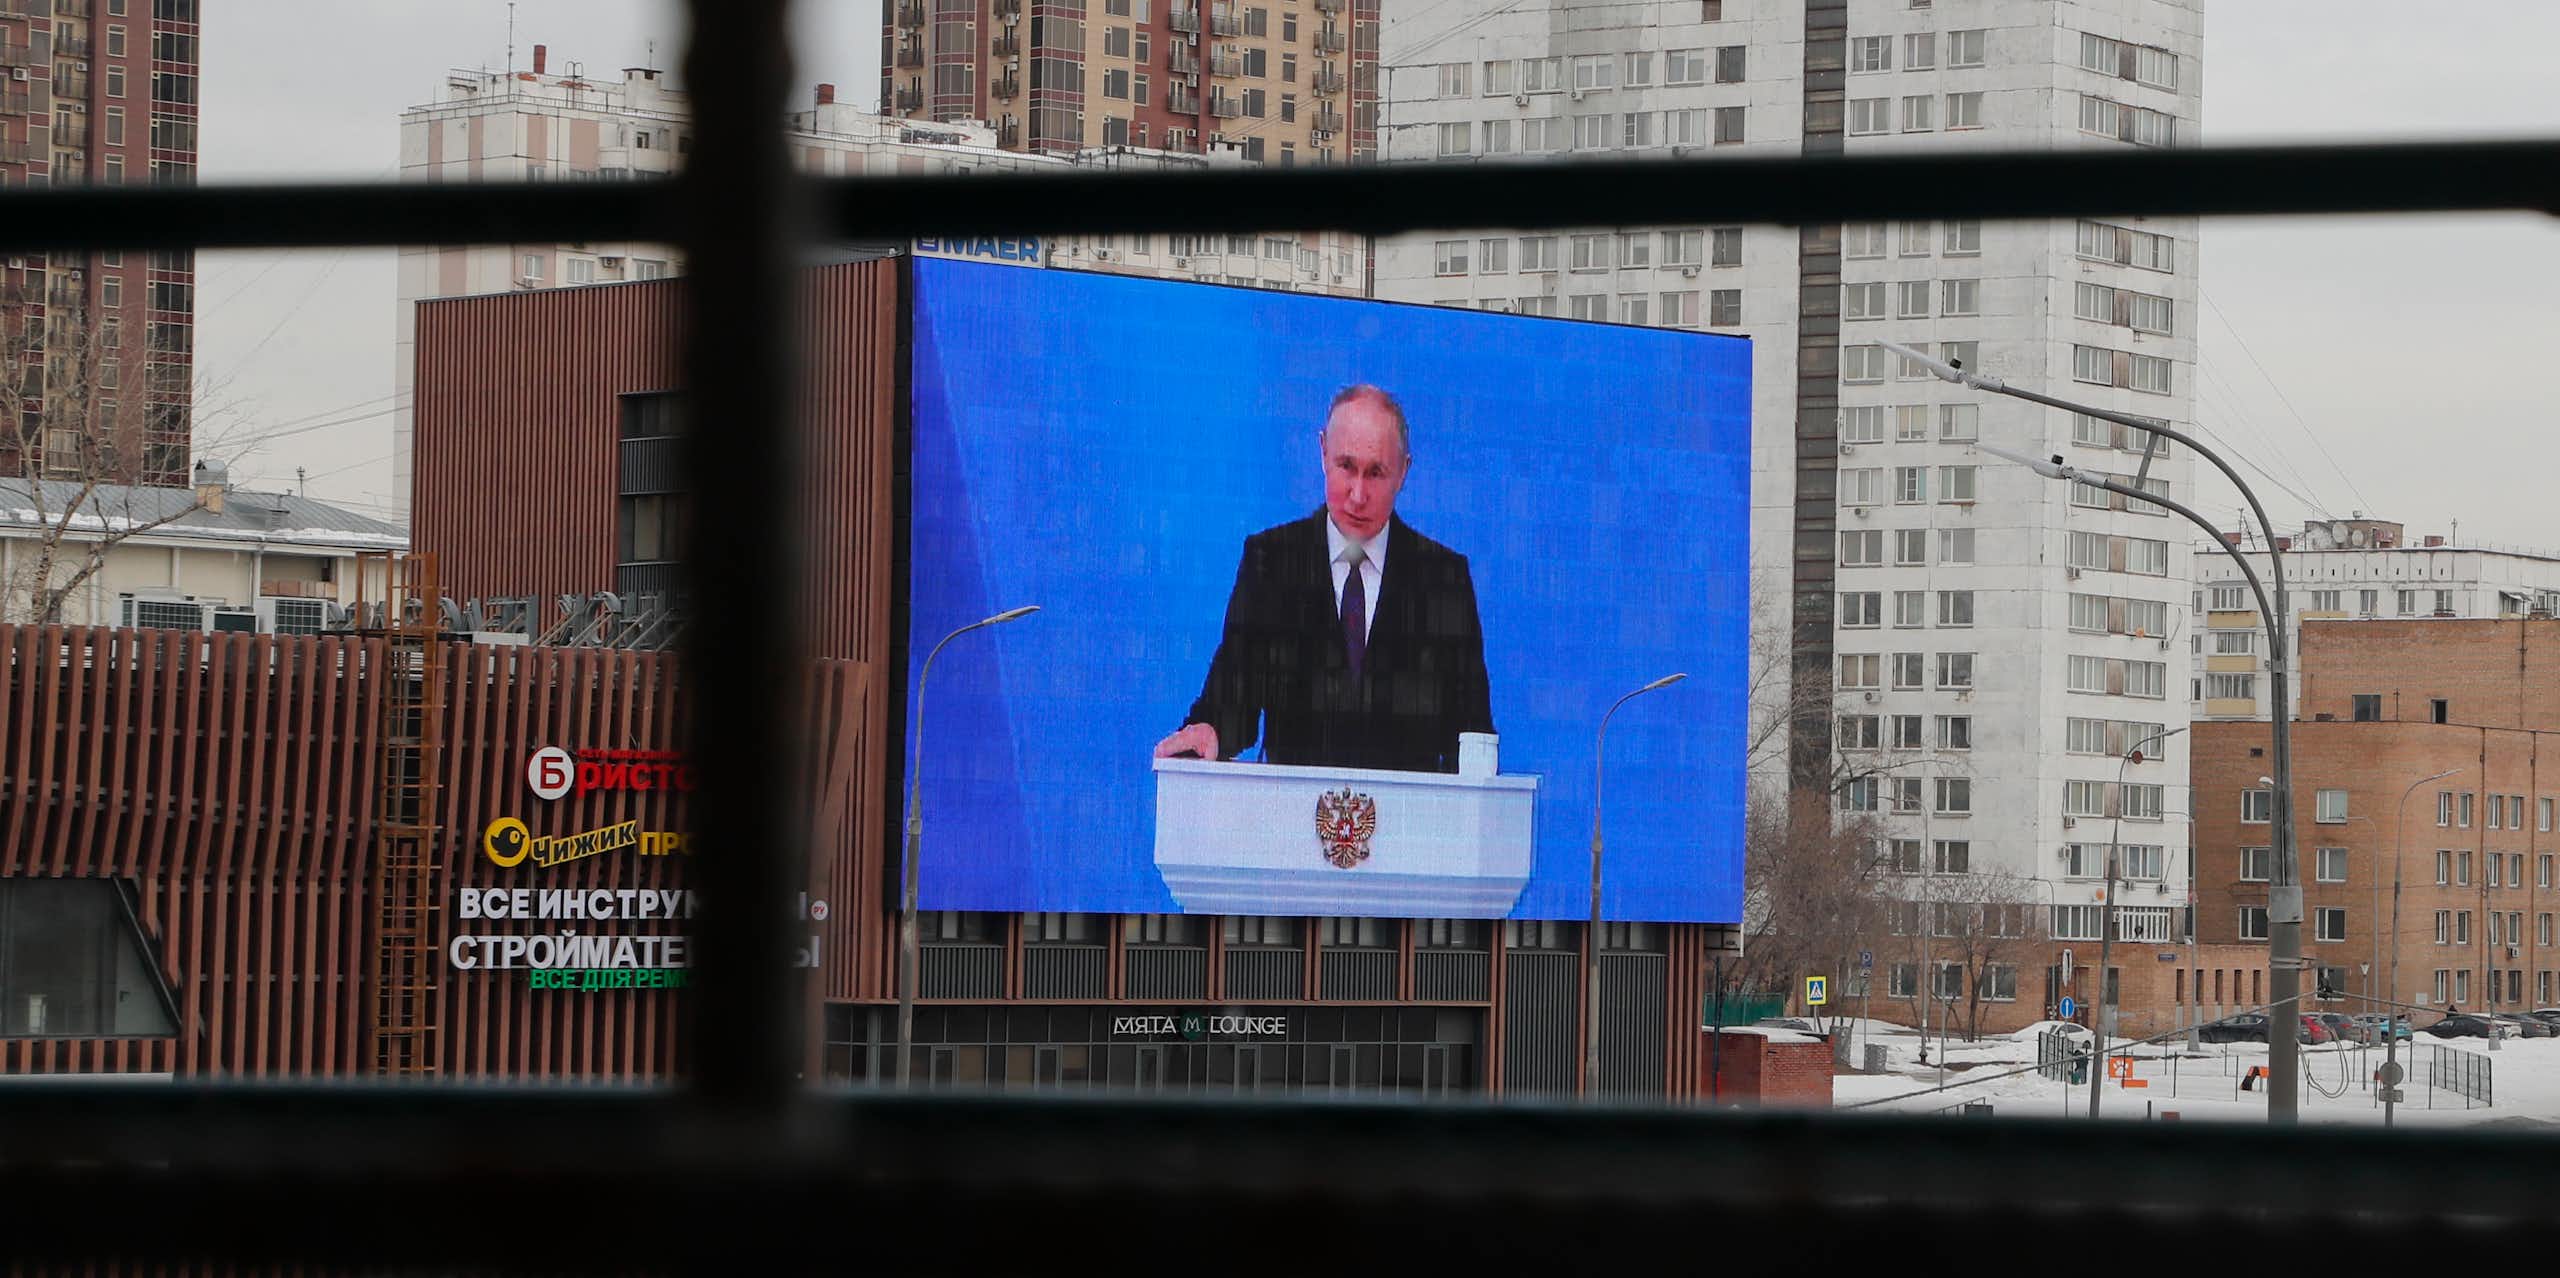 A big screen in a street showing Vladimir Russia. 